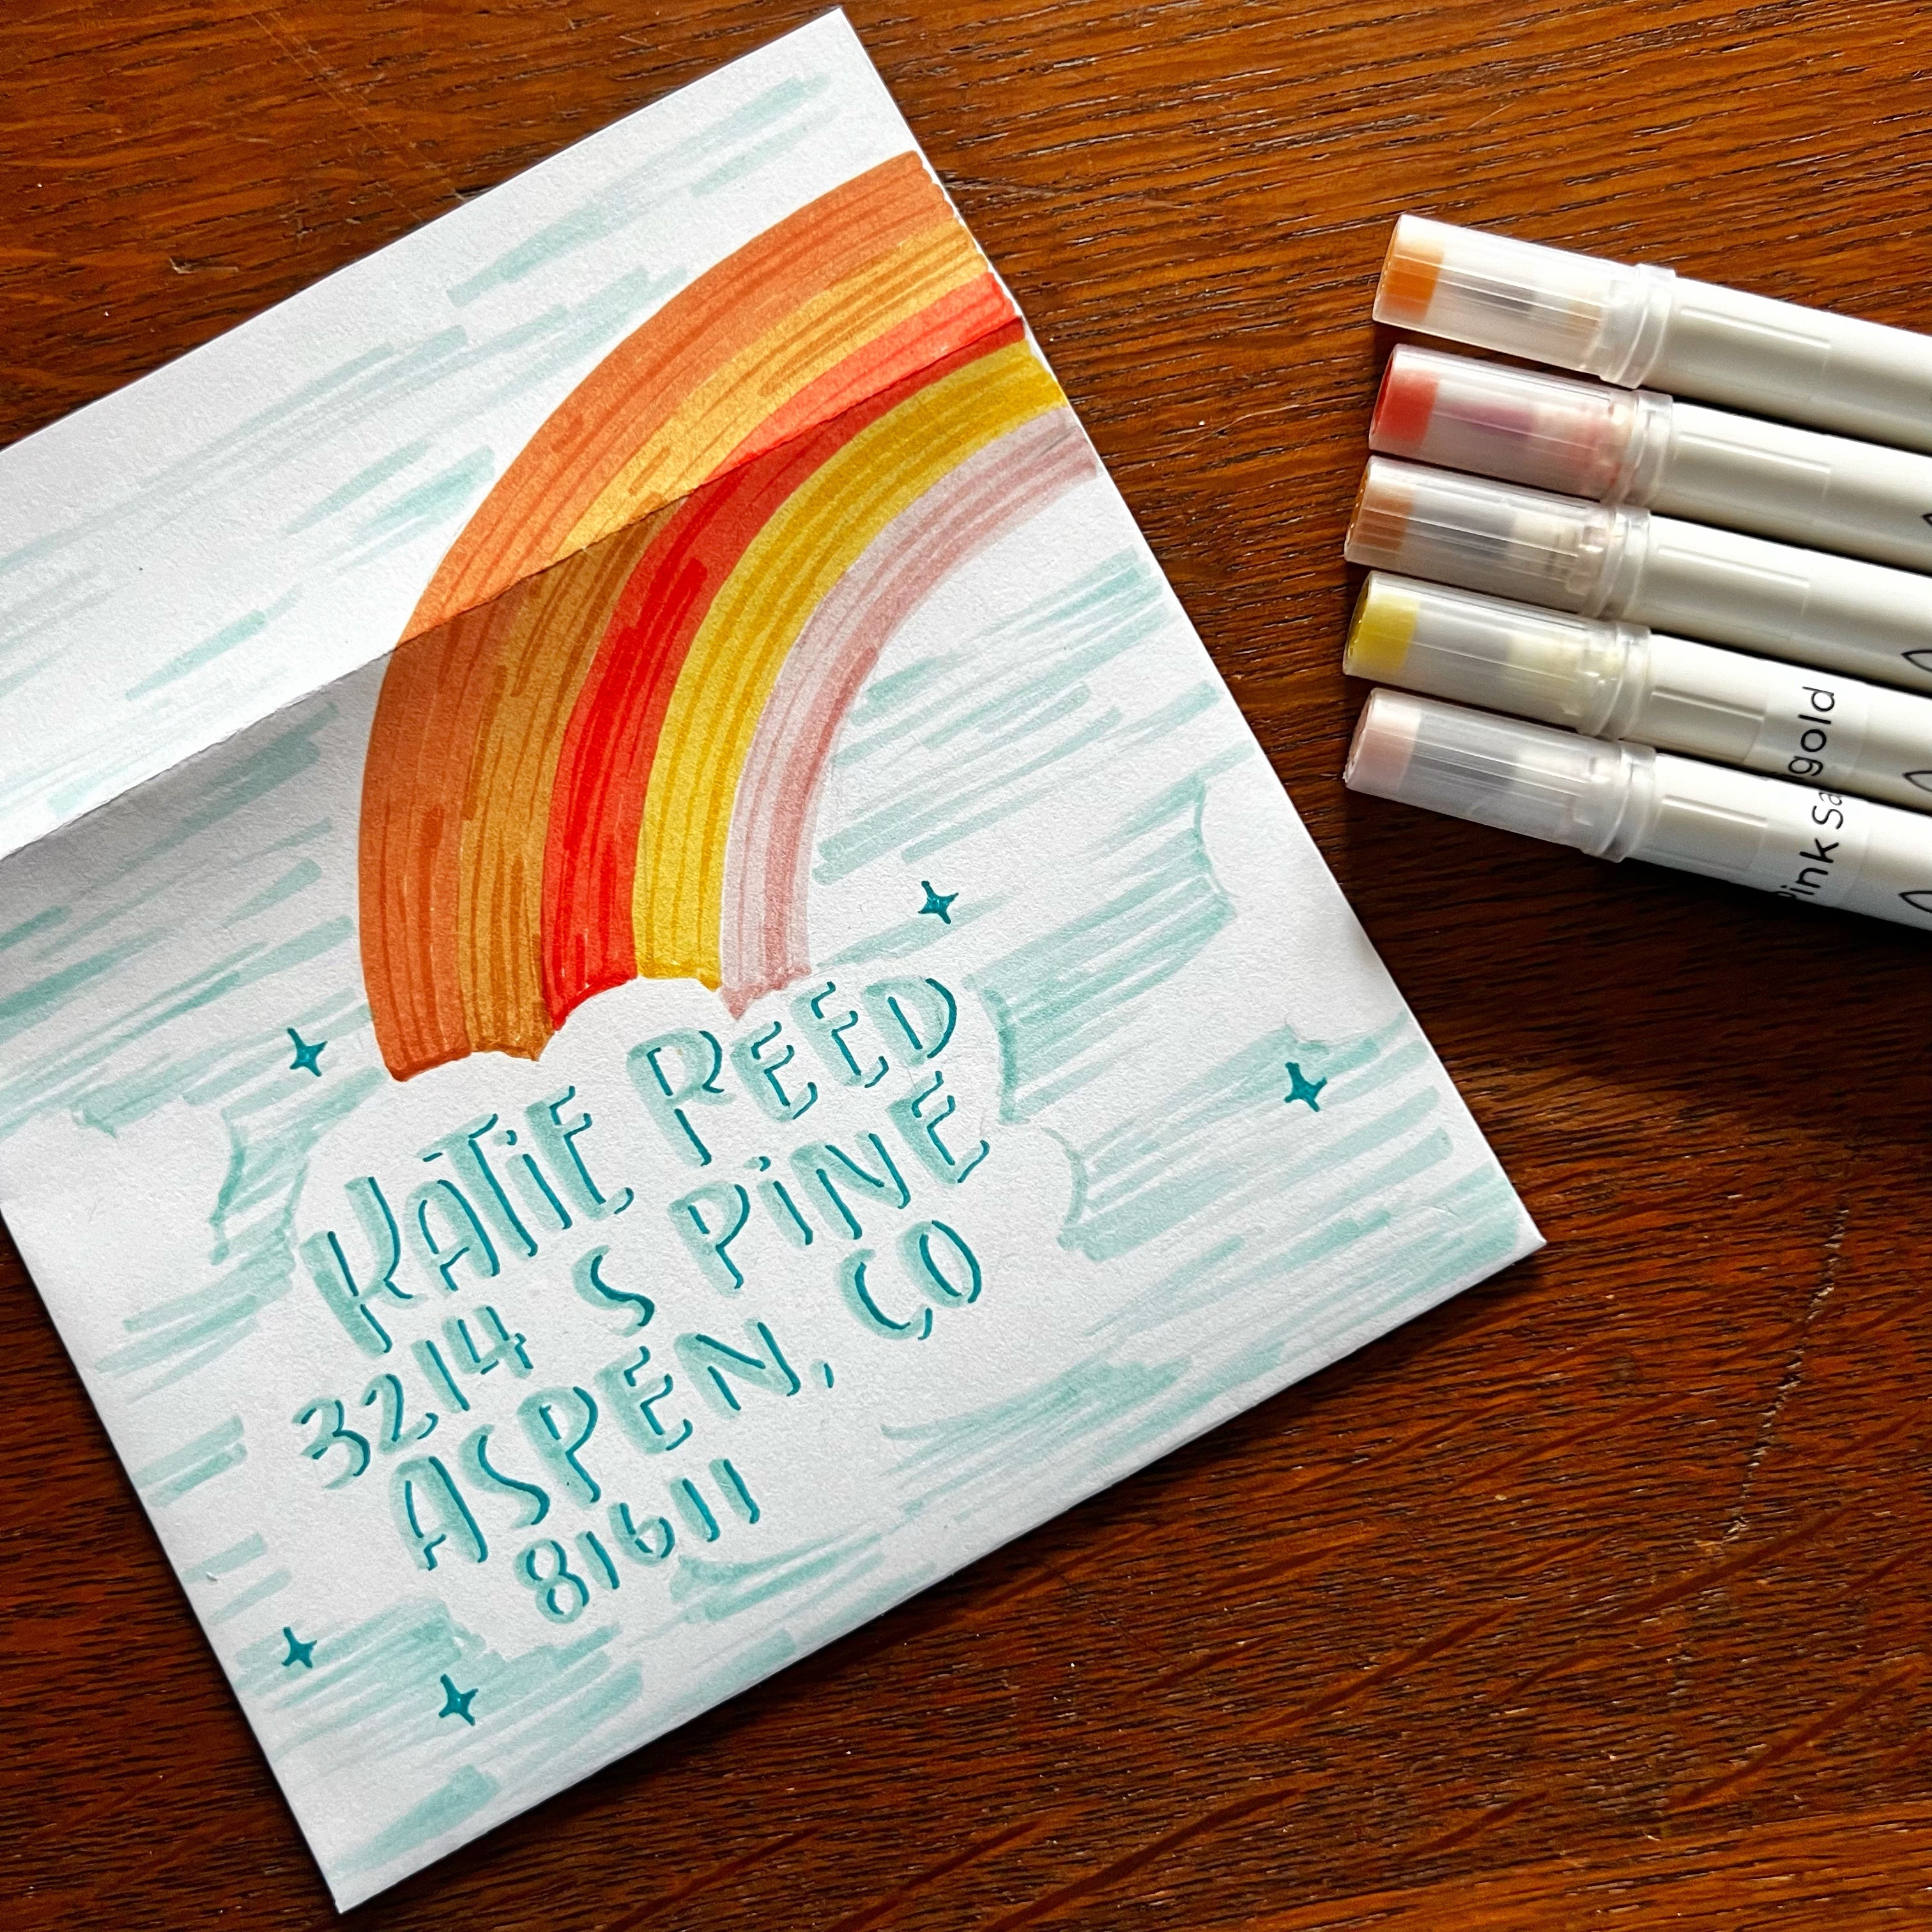 Picture of envelope decorated with rainbow and cloud. Calliograph pens next to envelope.